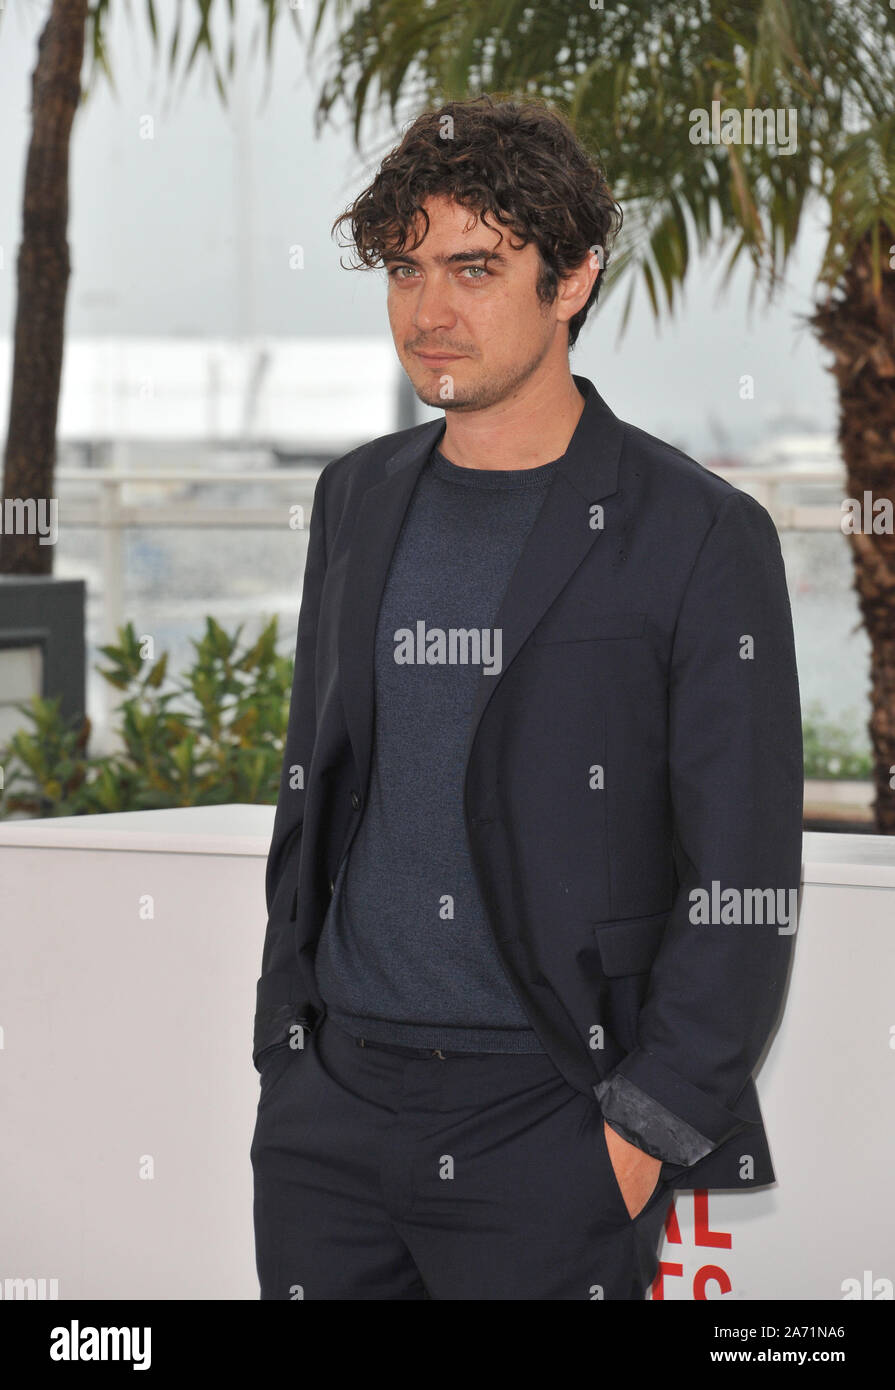 CANNES, FRANCE. May 18, 2013: Riccardo Scamarcio at photocall for his movie  "Miele" at the 66th Festival de Cannes. © 2013 Paul Smith / Featureflash  Stock Photo - Alamy